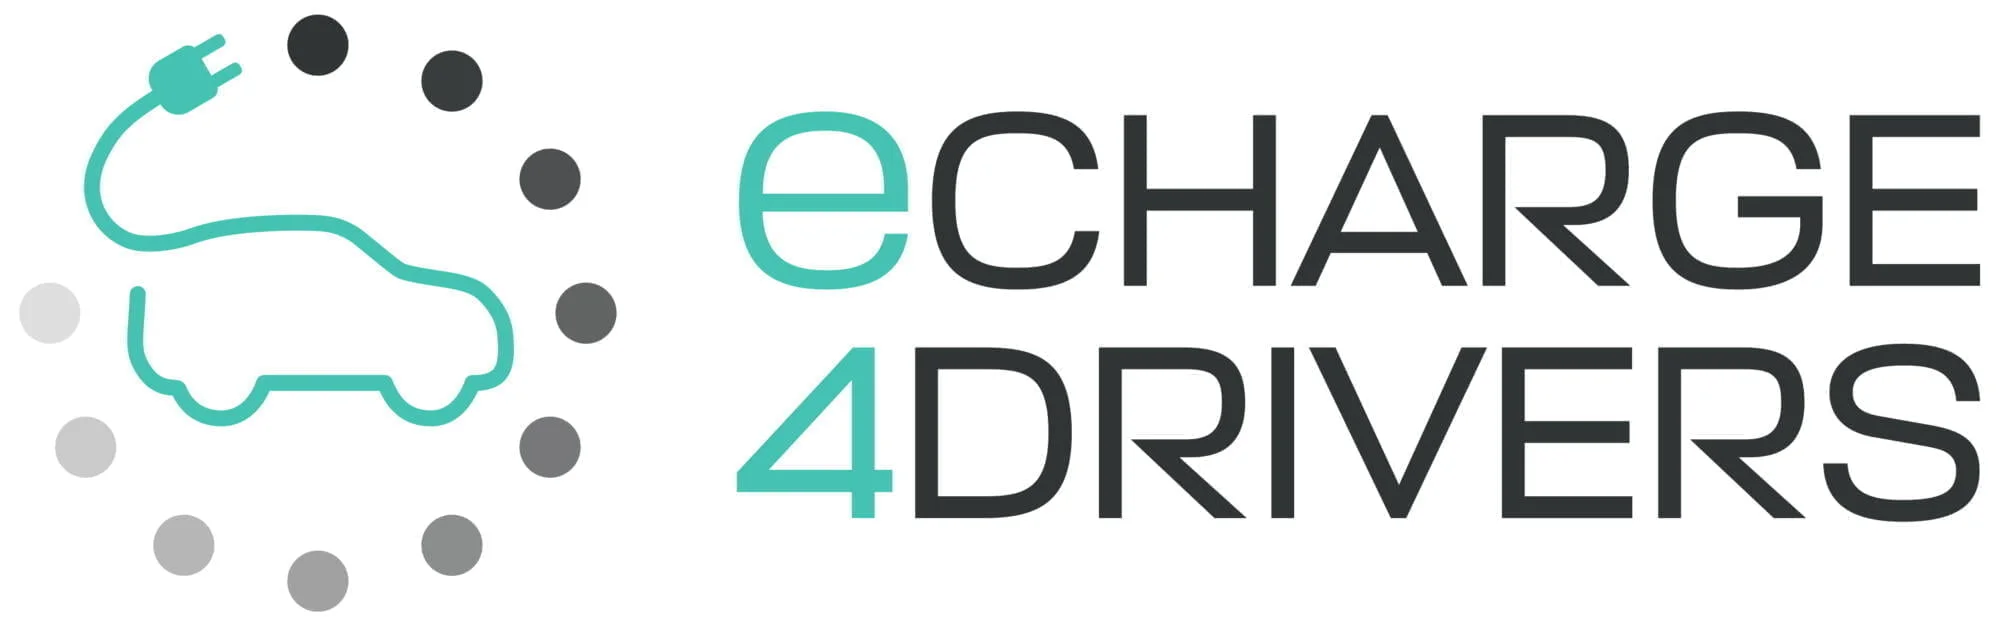 eCharge4Drivers opens survey on electric vehicle charging